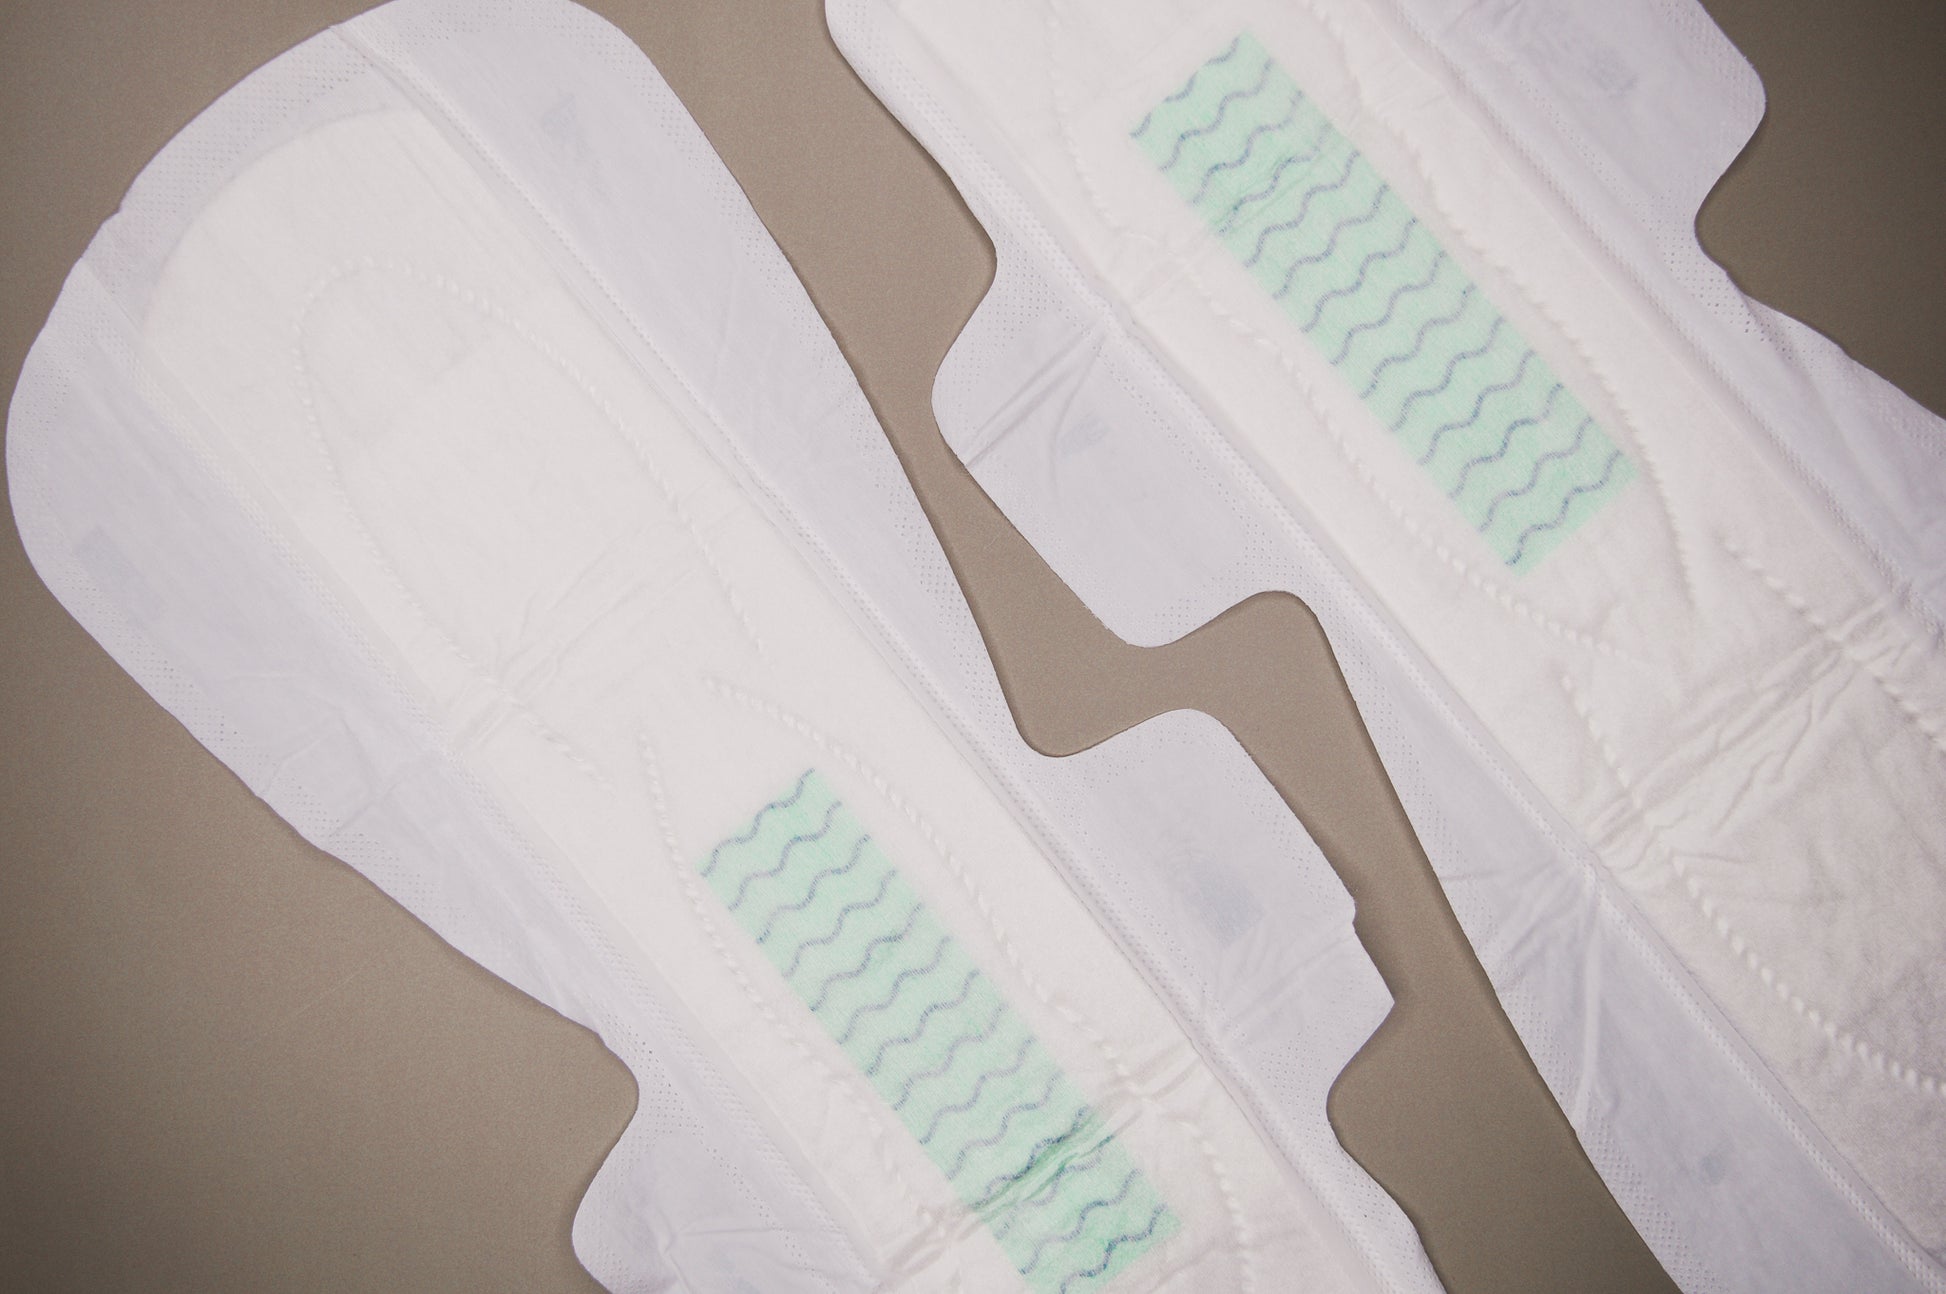 Spirit Maternity Pads - two open pads